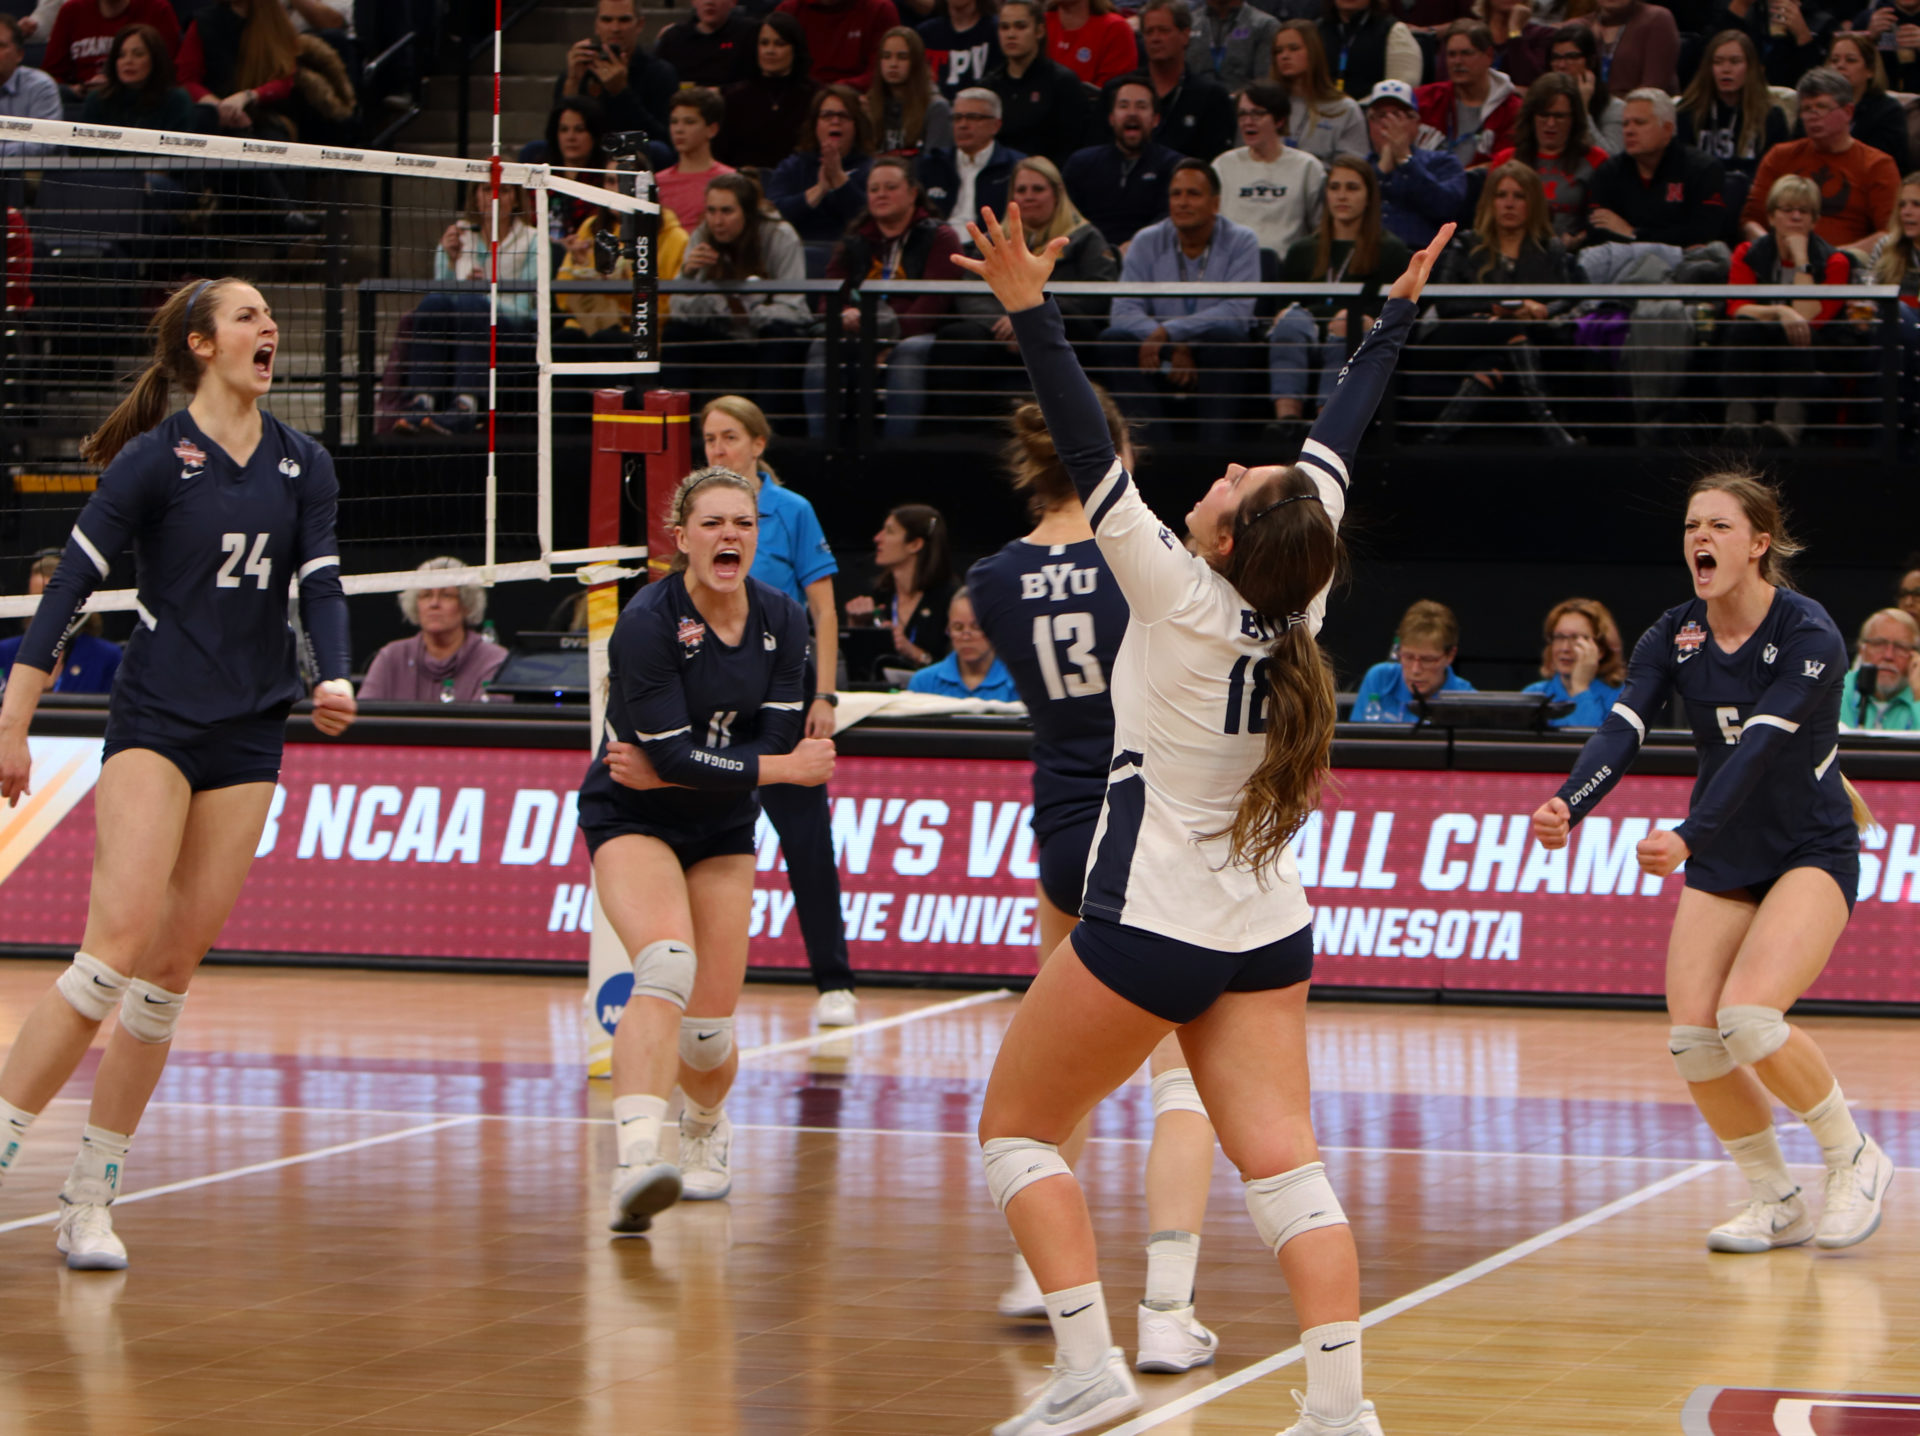 2019 BYU women's volleyball schedule headlined by trio of top matchups